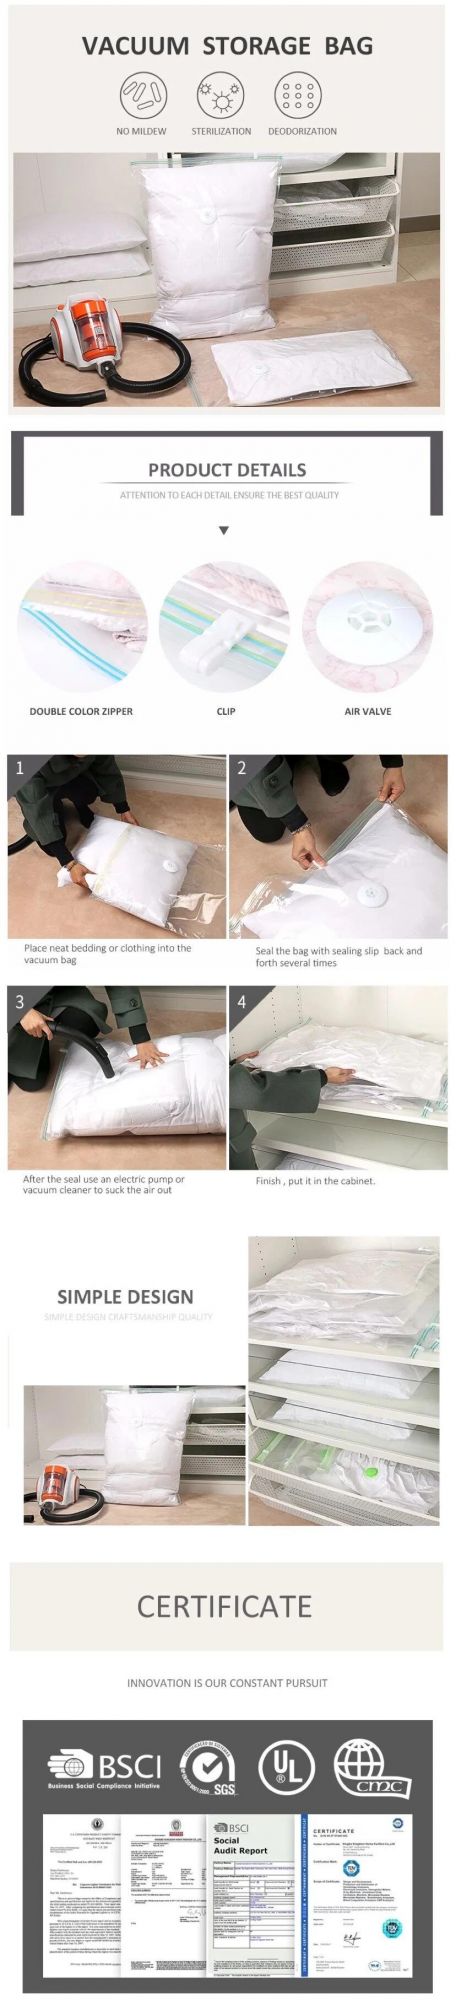 Hot Sell Compressed 75% Space Vacuum Bag for Bedding and Clothes